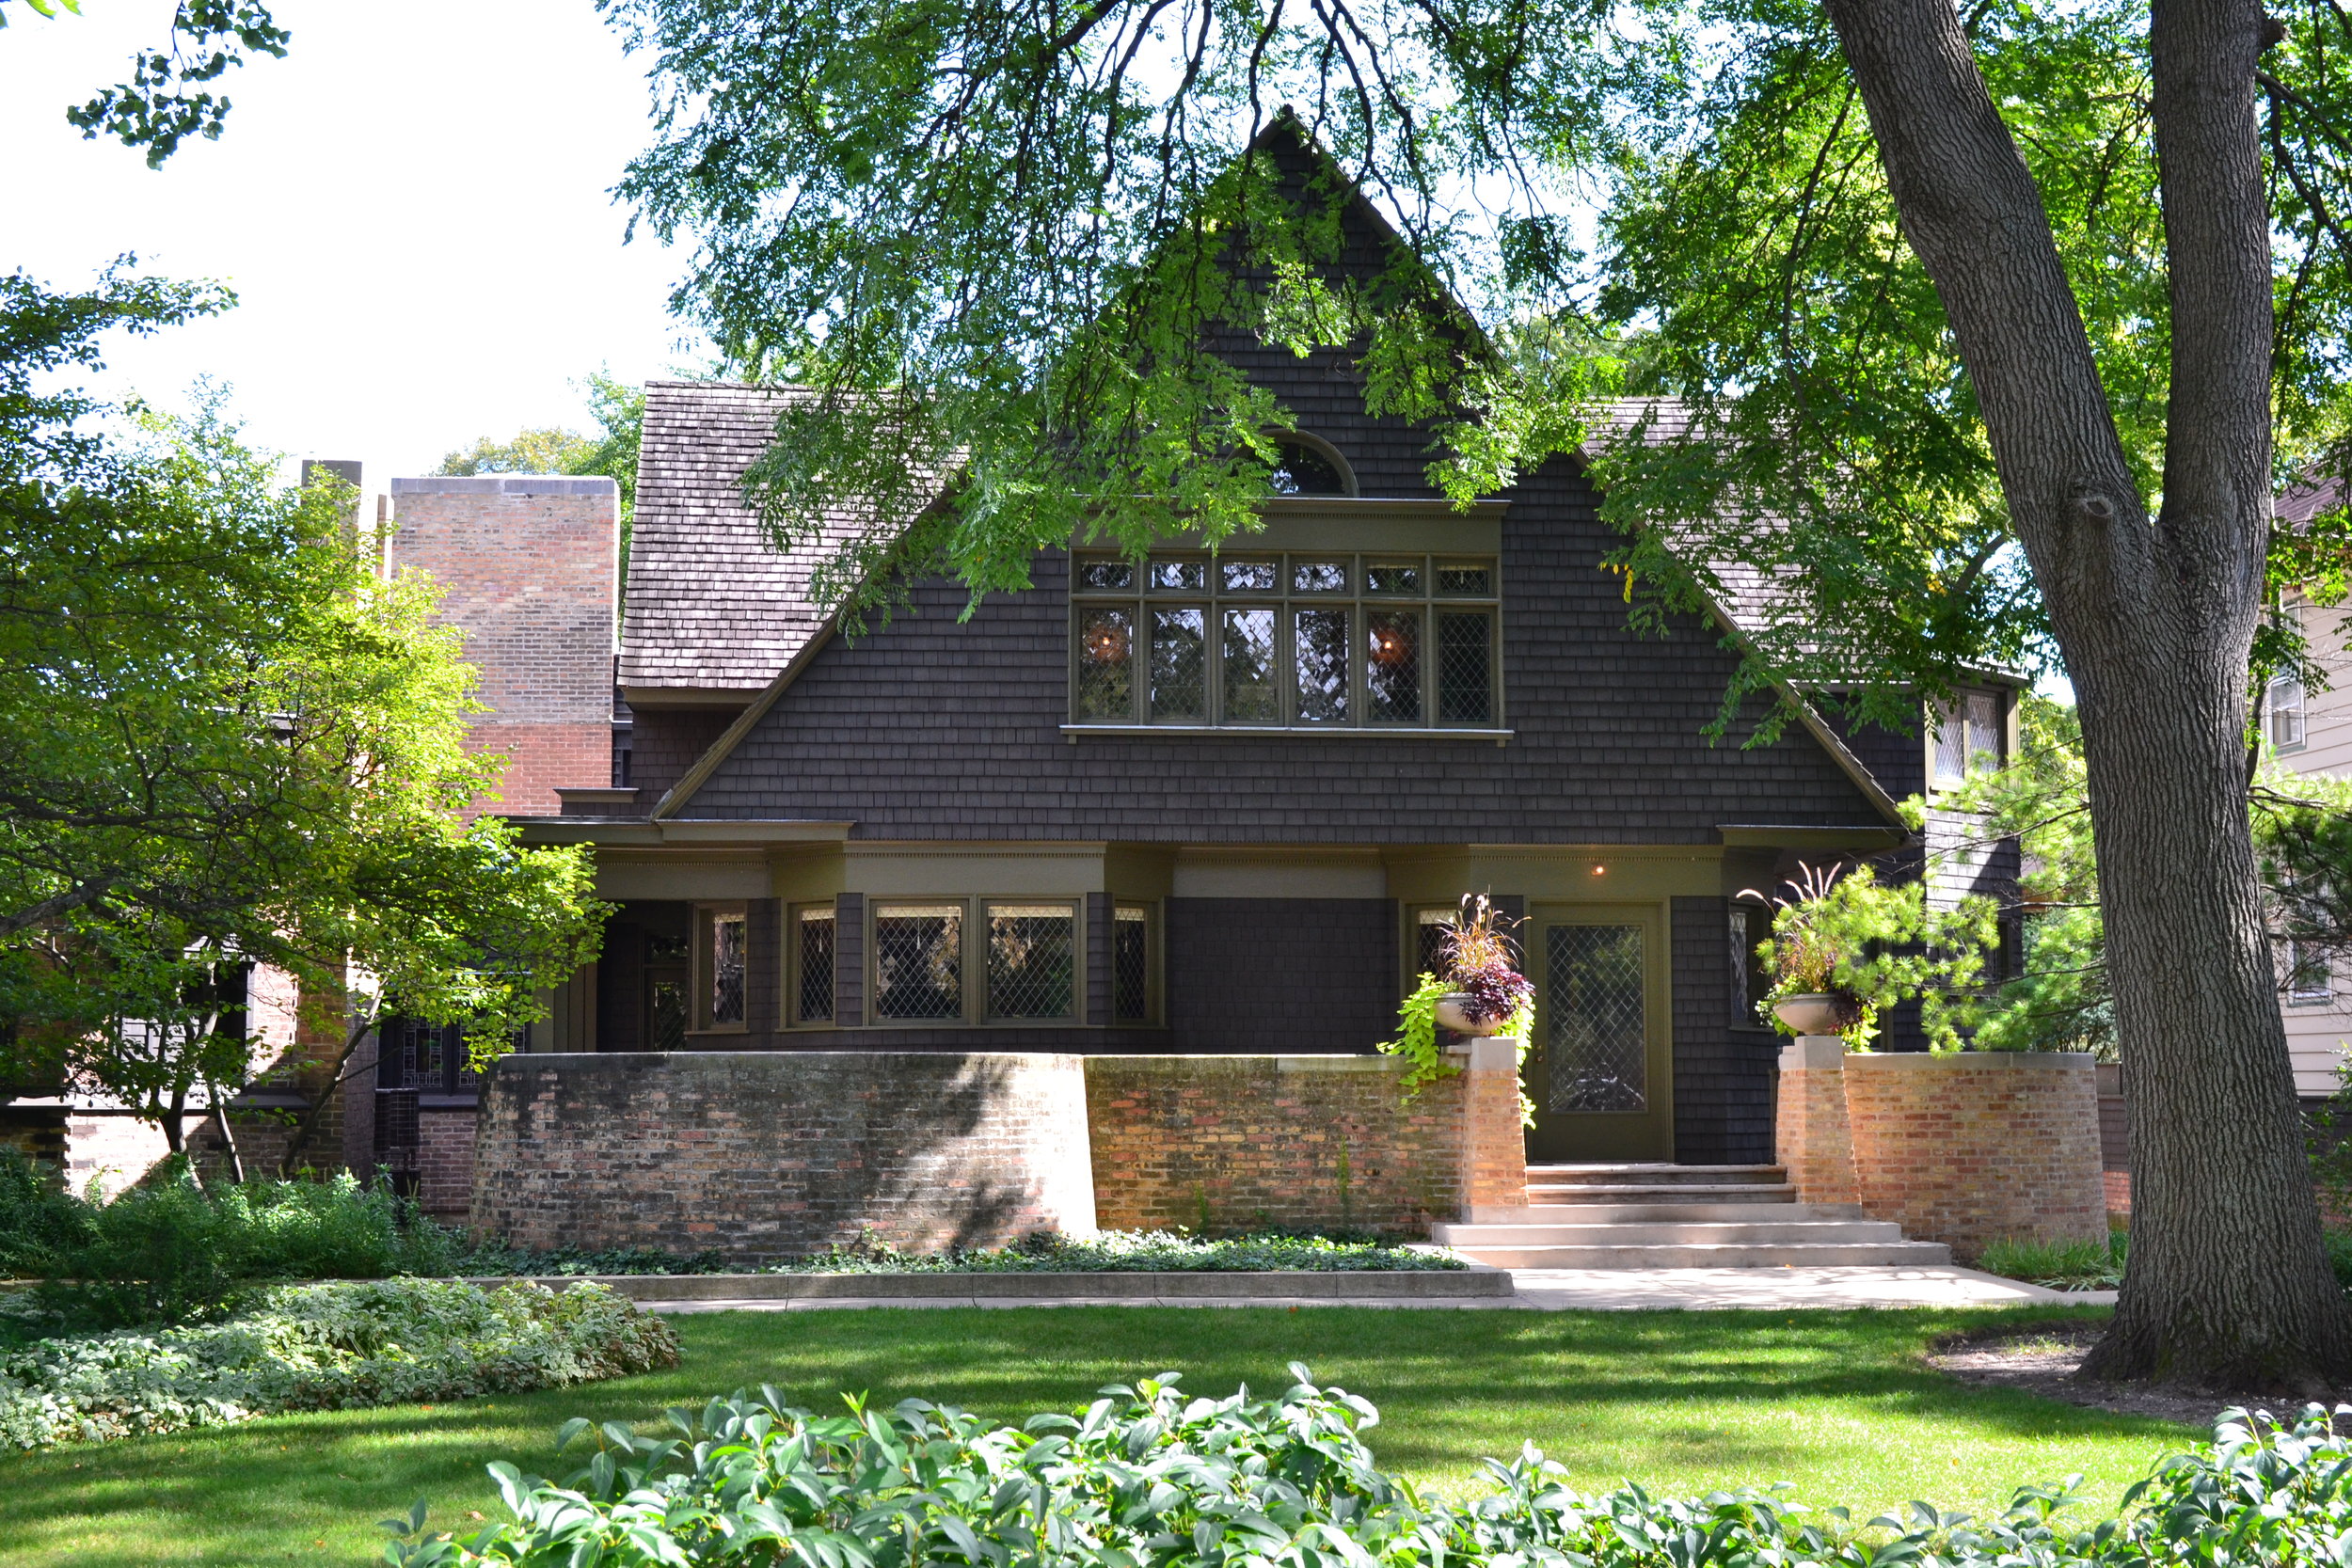 The Frank Lloyd Wright Home and Studio